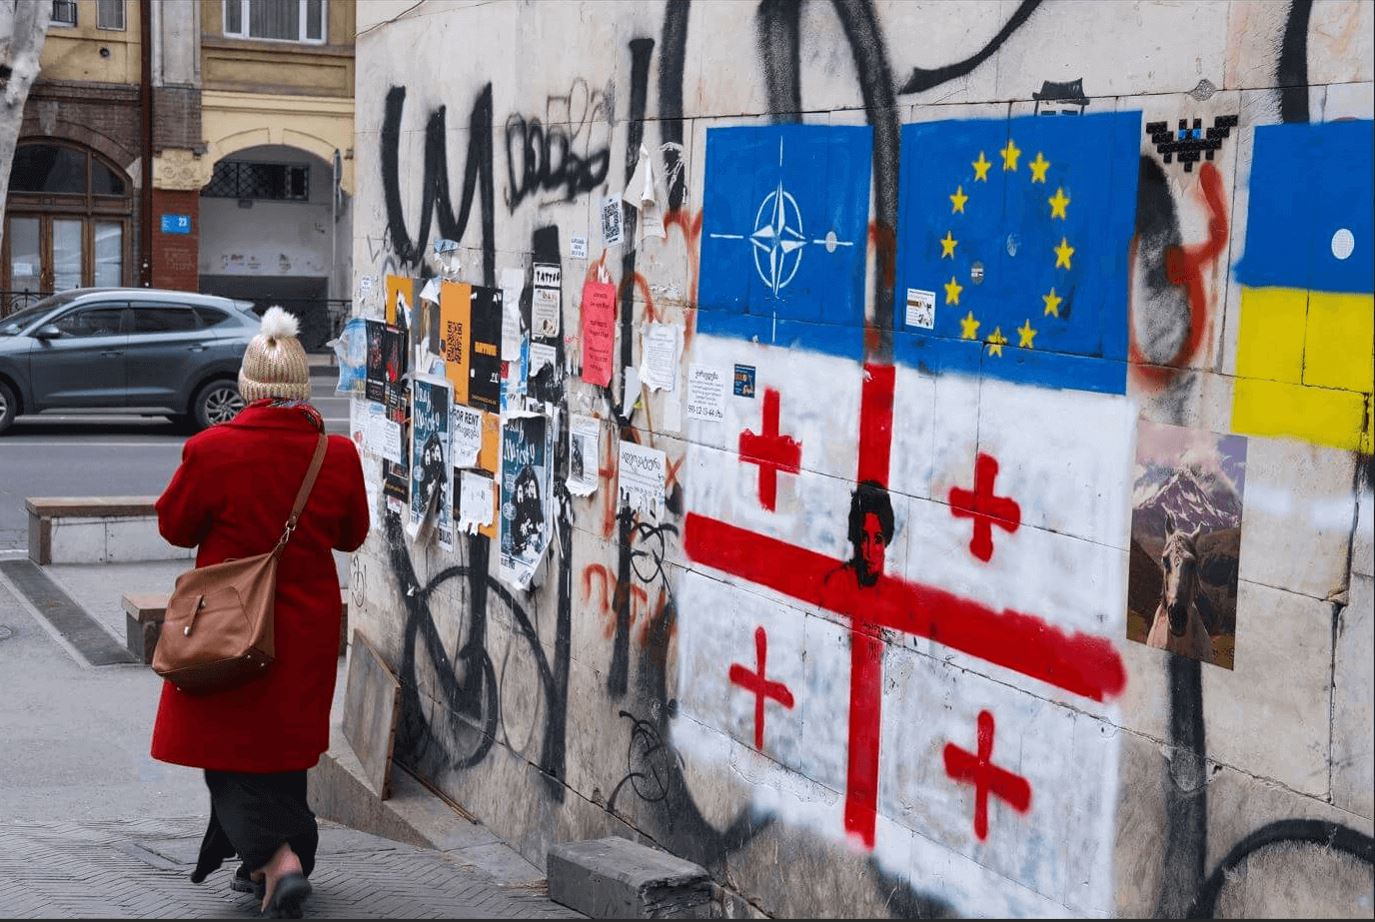 The walls in Tbilisi speak out / Reuters